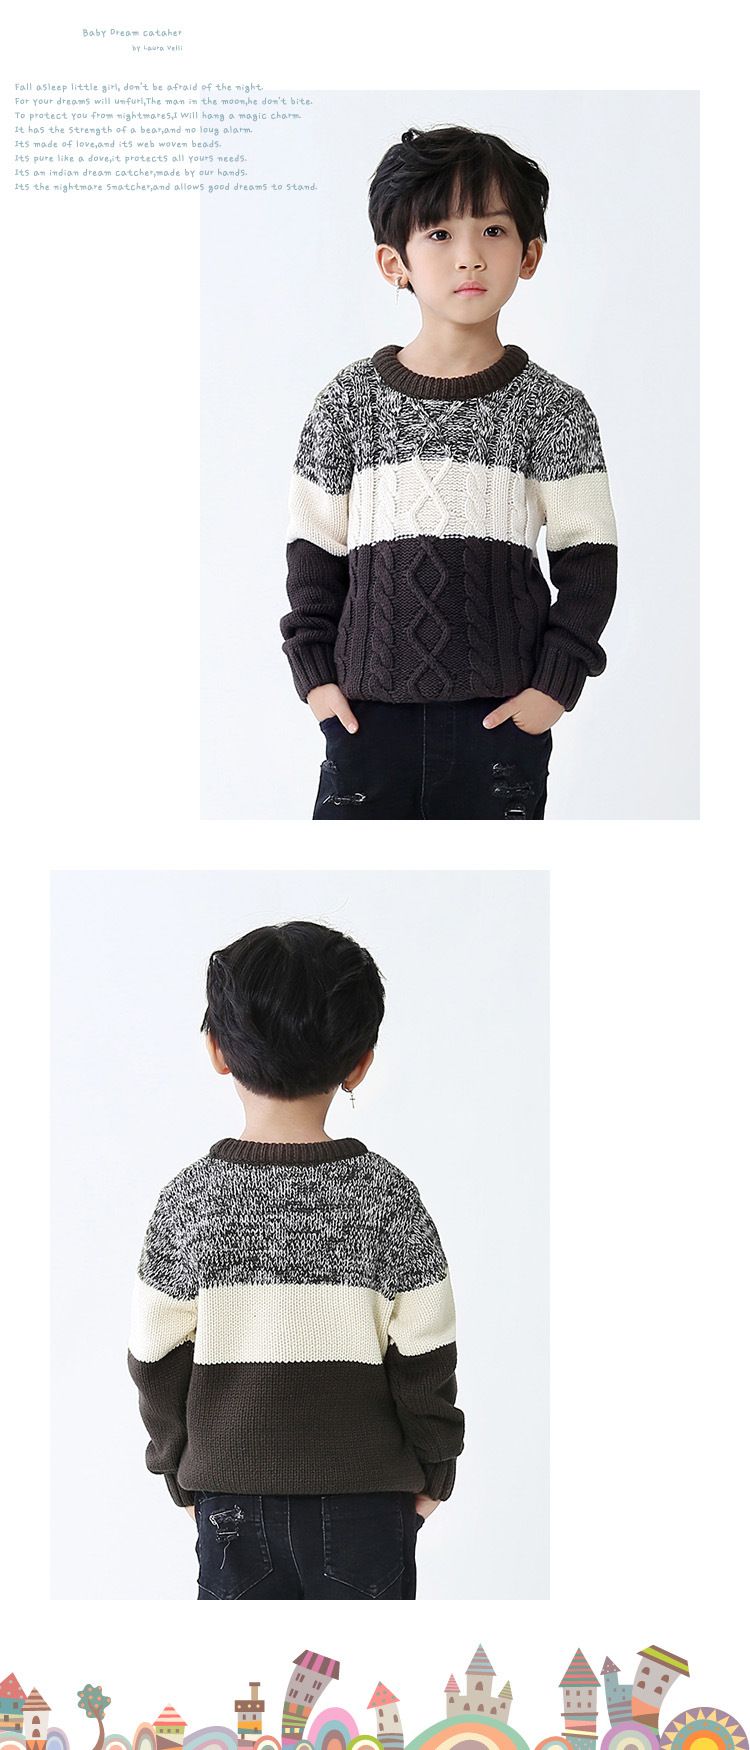 Wholesalers 2017 Autumn Winter Kids Clothing New Arrival Big Boys Pullover Knitted Sweaters Patchwork Knitwear 110 150cm Free Knitting Patterns For